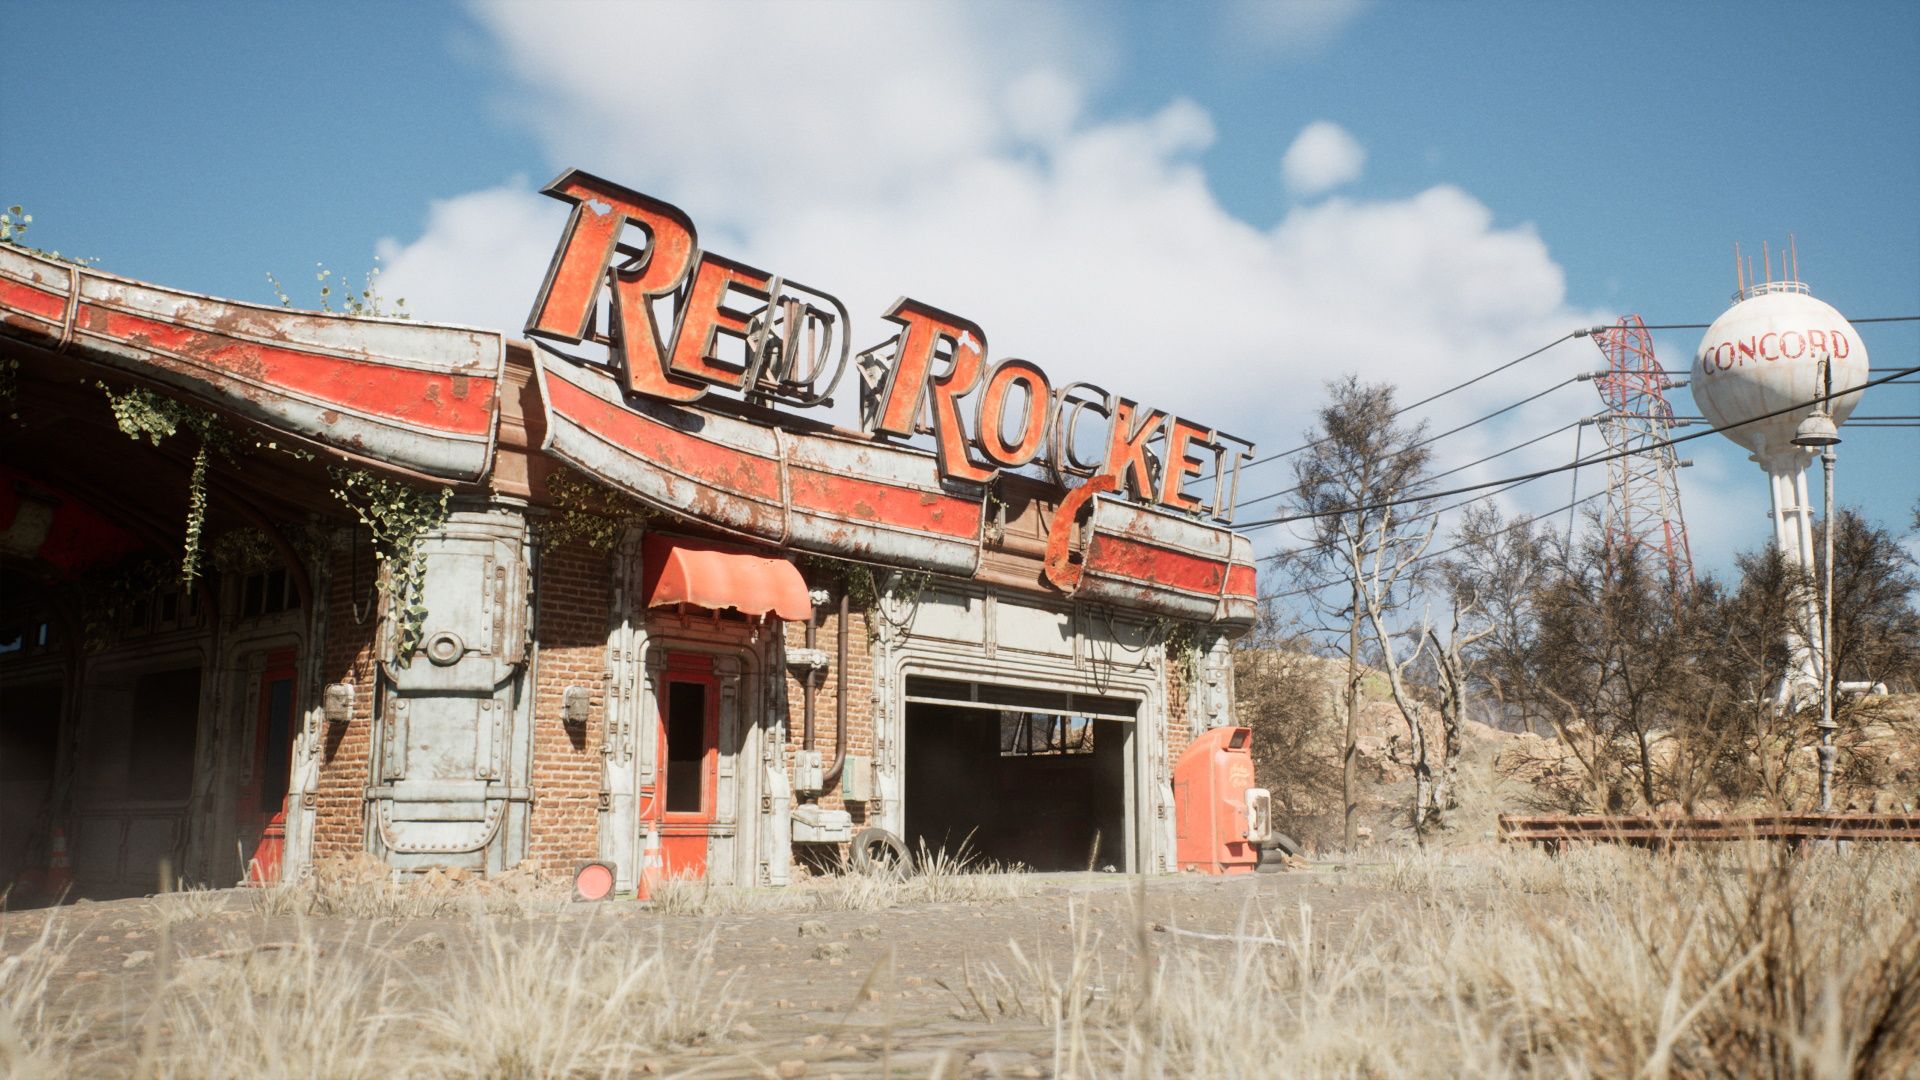 The red rocket fallout 4 фото 17